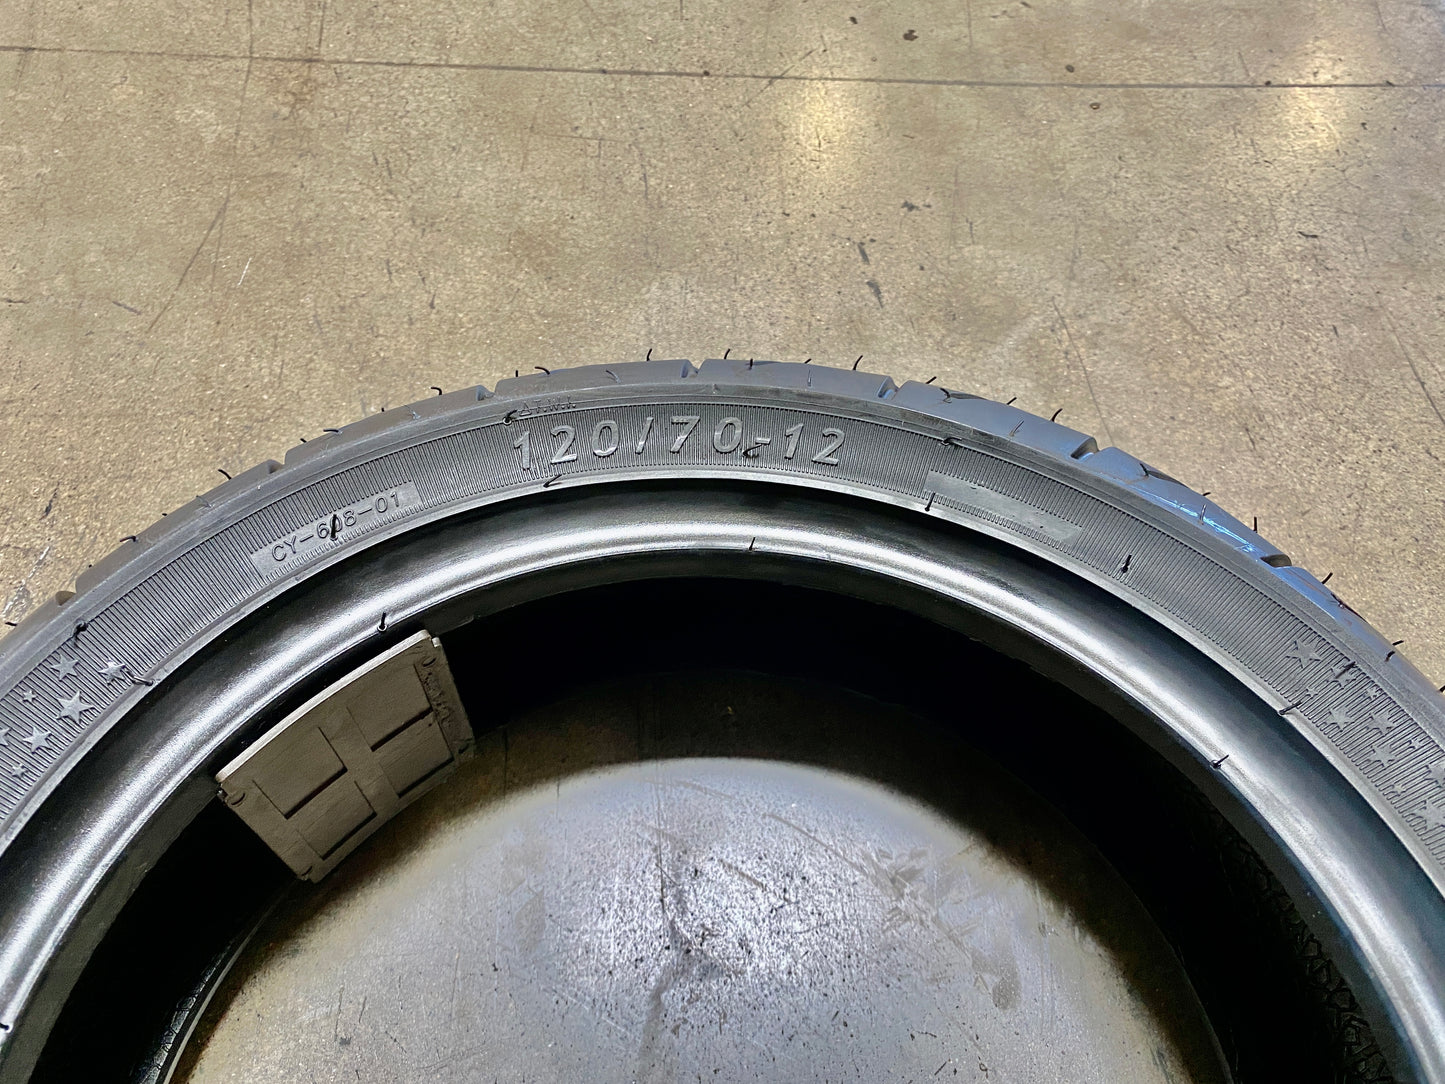 120/70-12 tire size